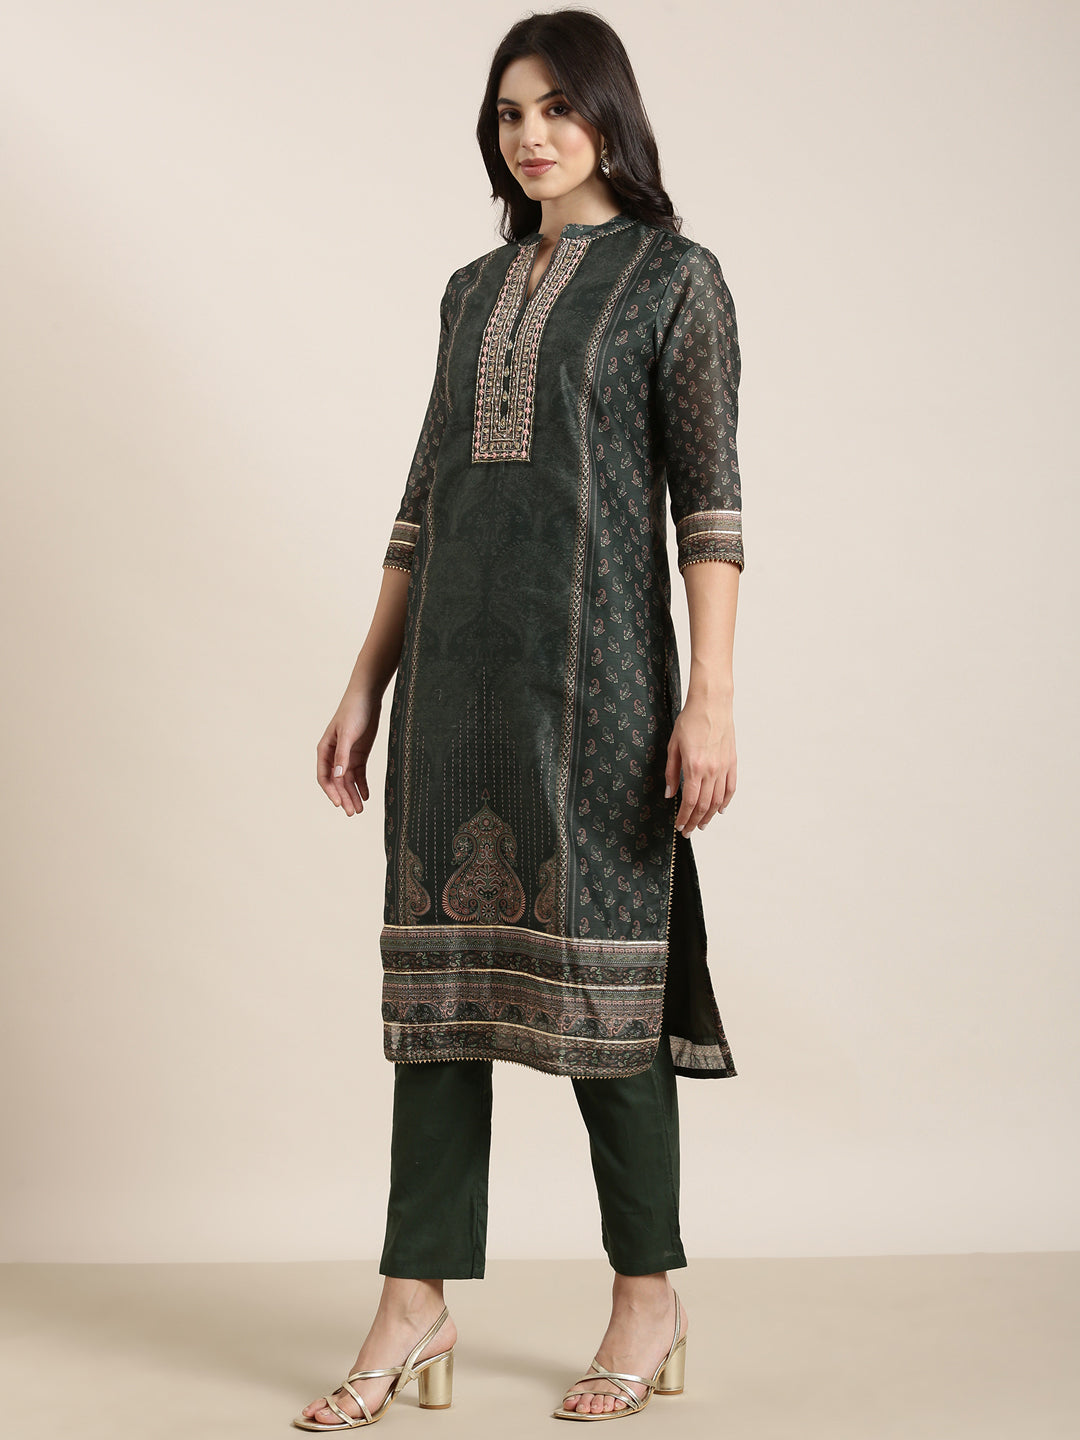 Women Straight Green Paisley Kurta and Trousers Set Comes With Dupatta